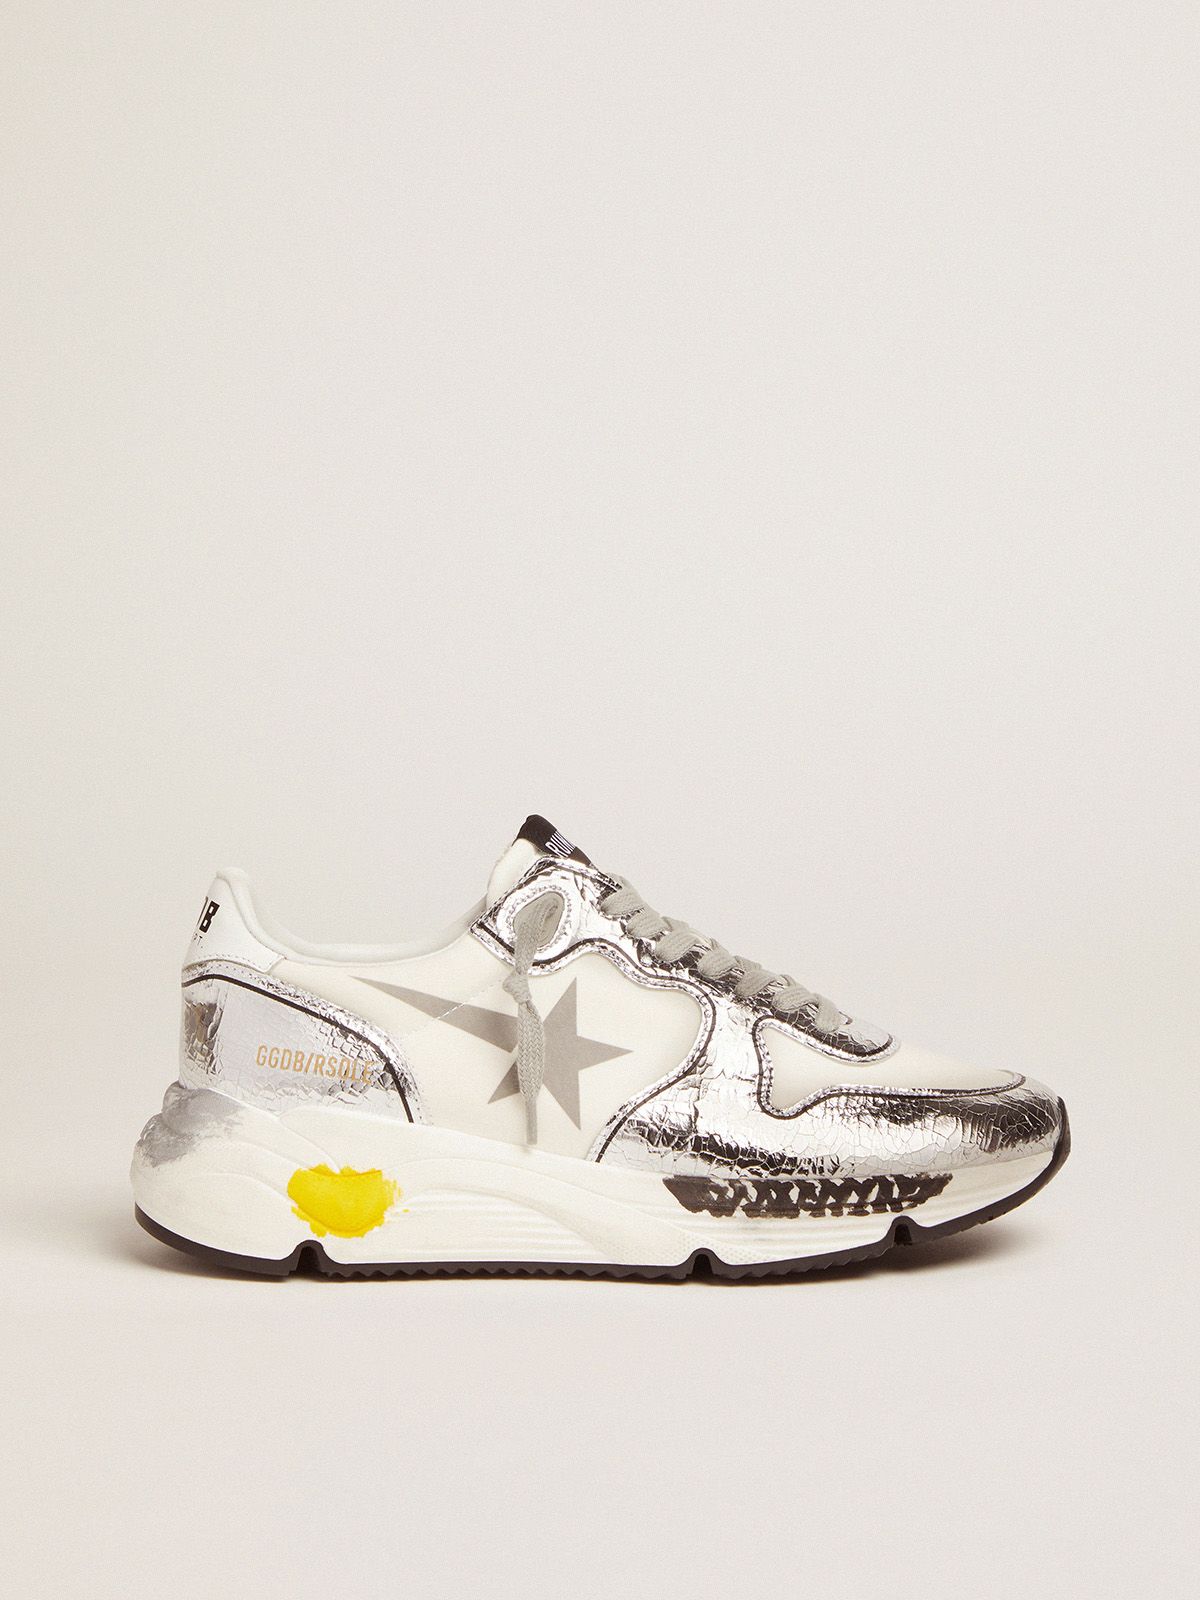 golden goose Running Silver Sole sneakers white and